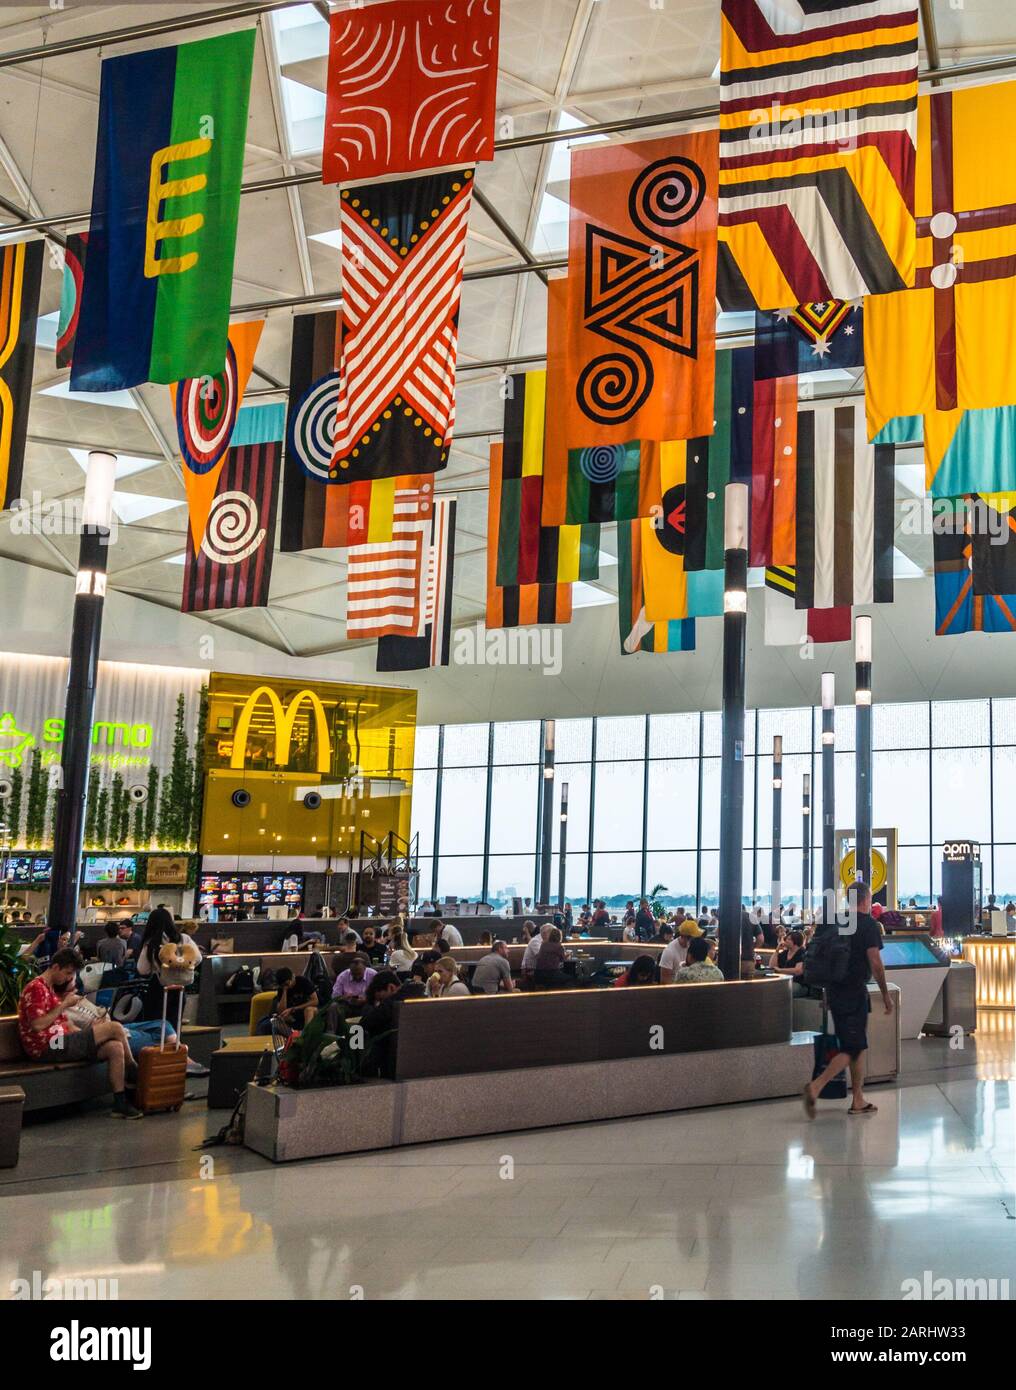 First Nation Flags installation by Archie Moore, 2018, Sydney airport international departures terminal 1, Sydney, Australia Stock Photo